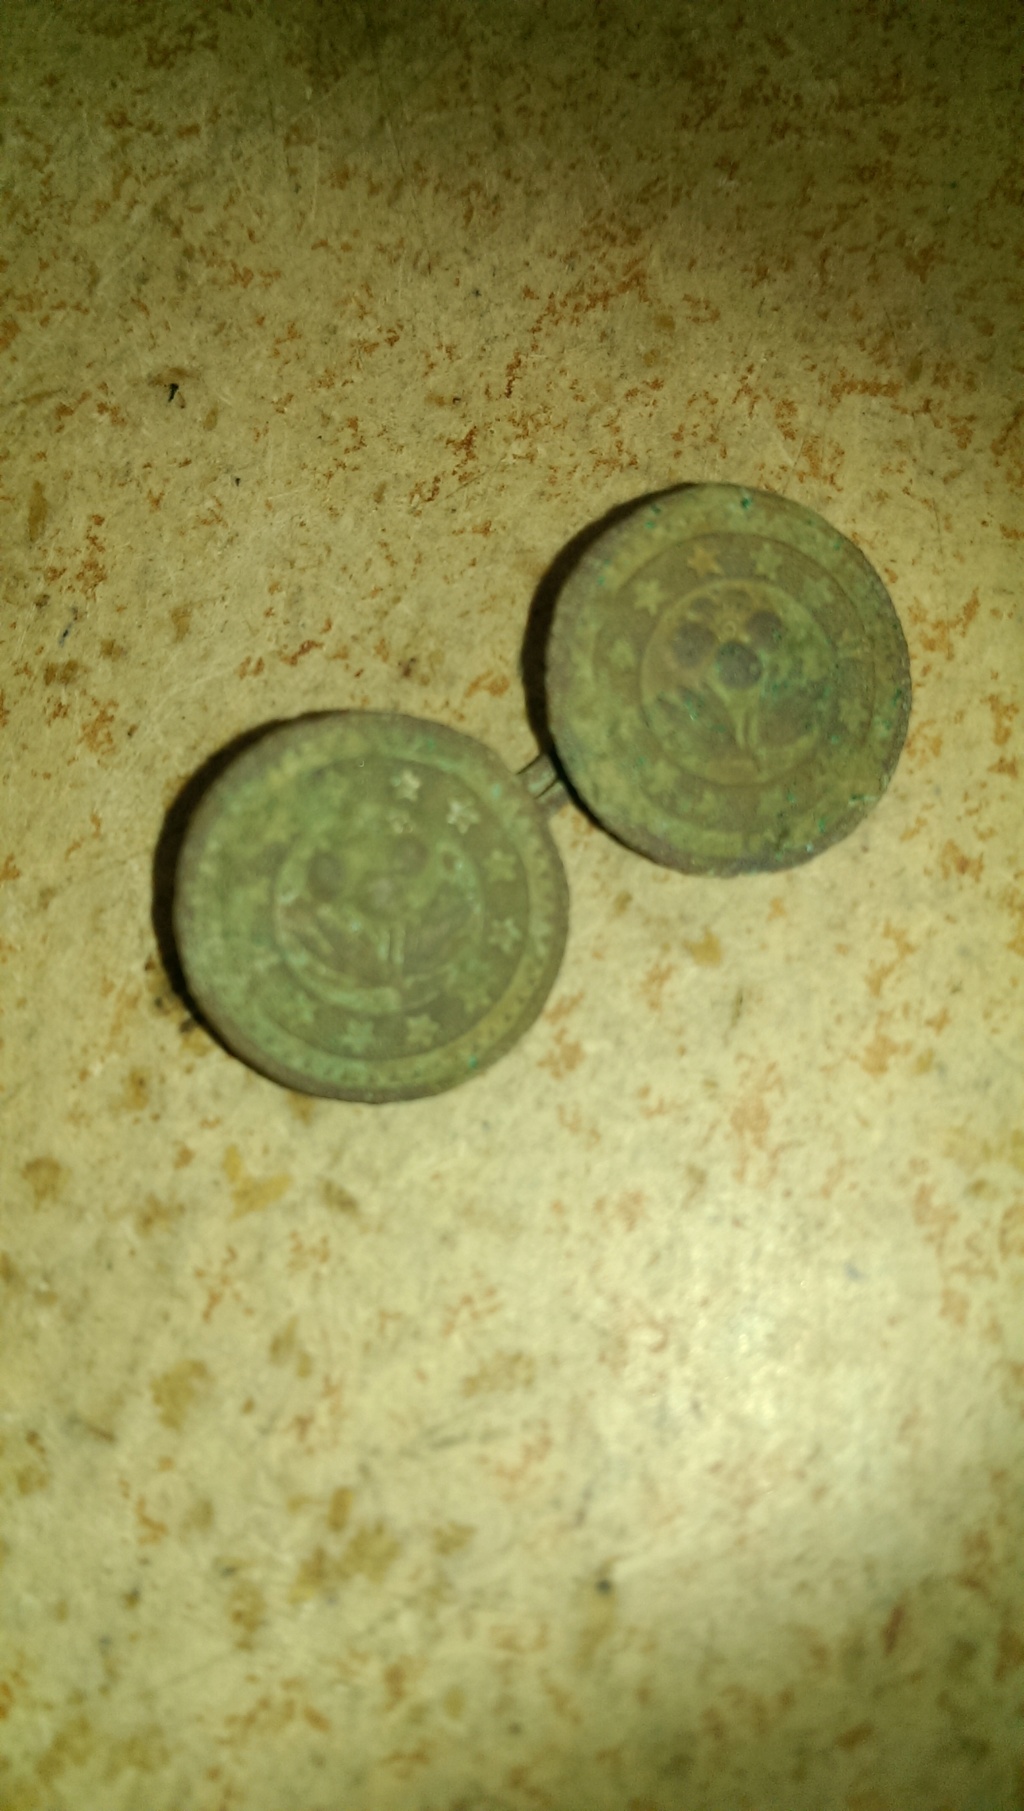 boutons manchette militaire ? Imag0231